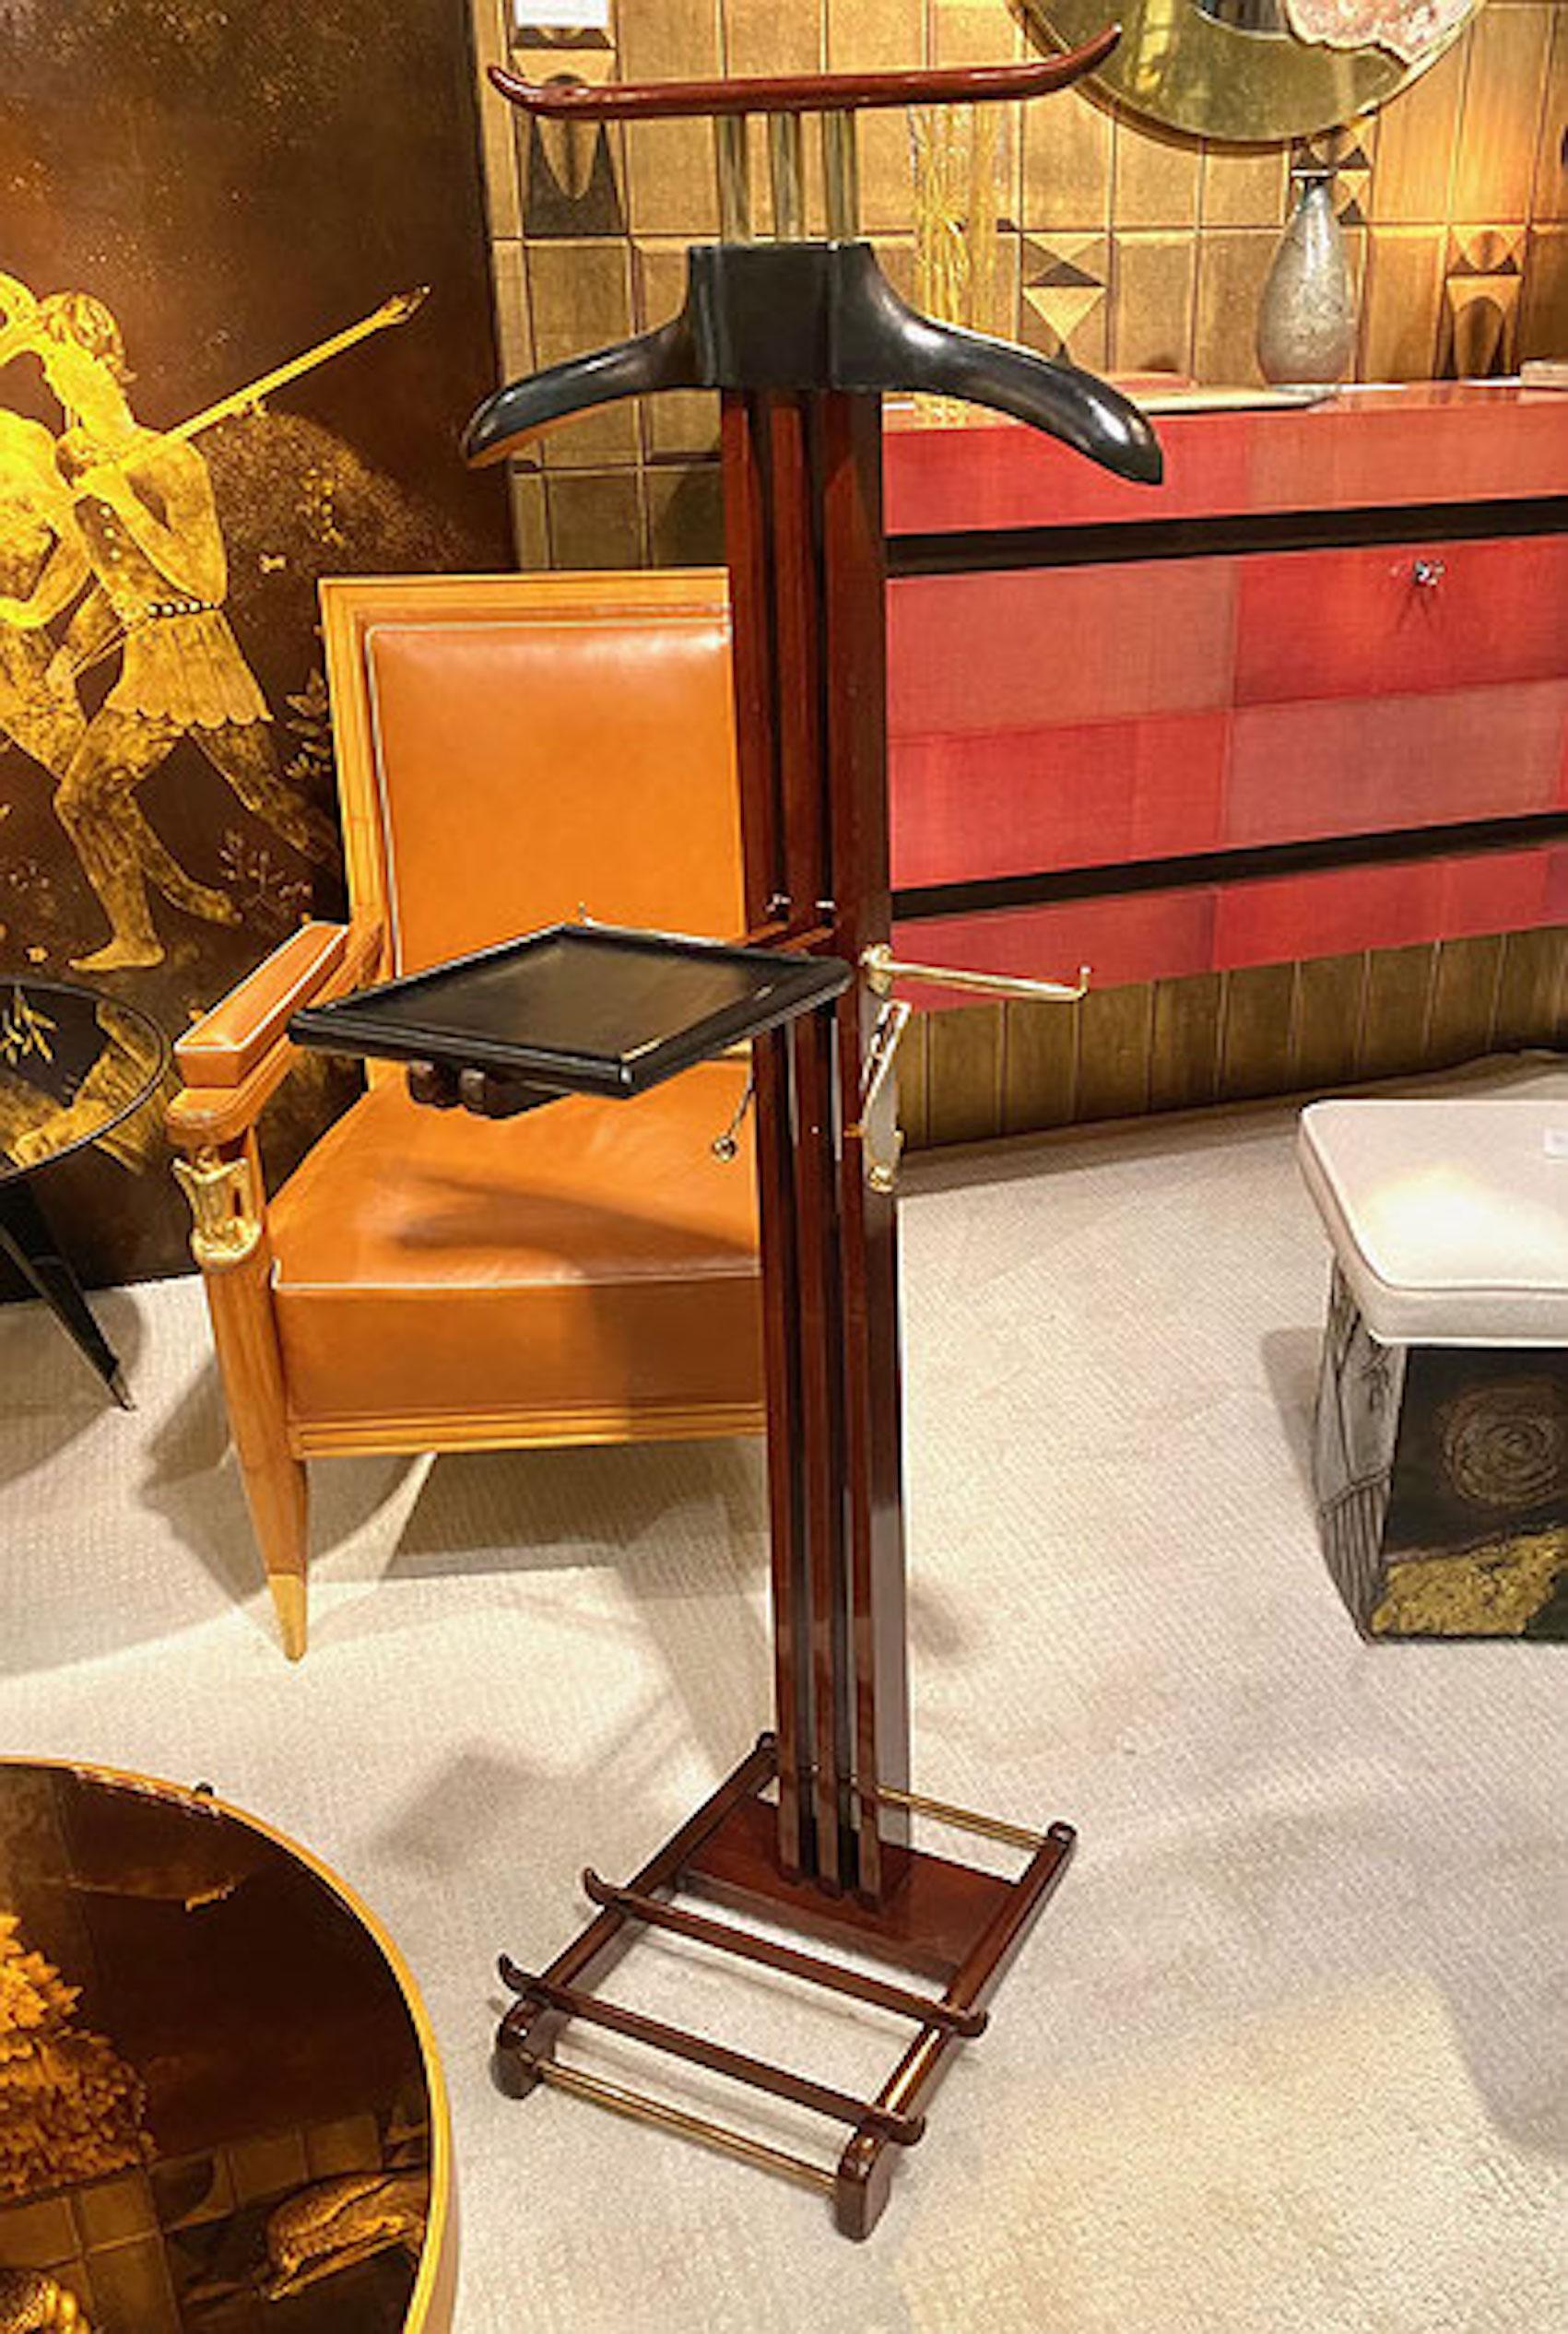 Rare Mahogany gentleman's valet by Paul Dupré Lafon for Hermès. The coat hanger and foldable shelf covered in black stitched leather, also fitted with two polished brass tie hooks and the base fitted with a polished brass shoe rack. Paul Dupré Lafon